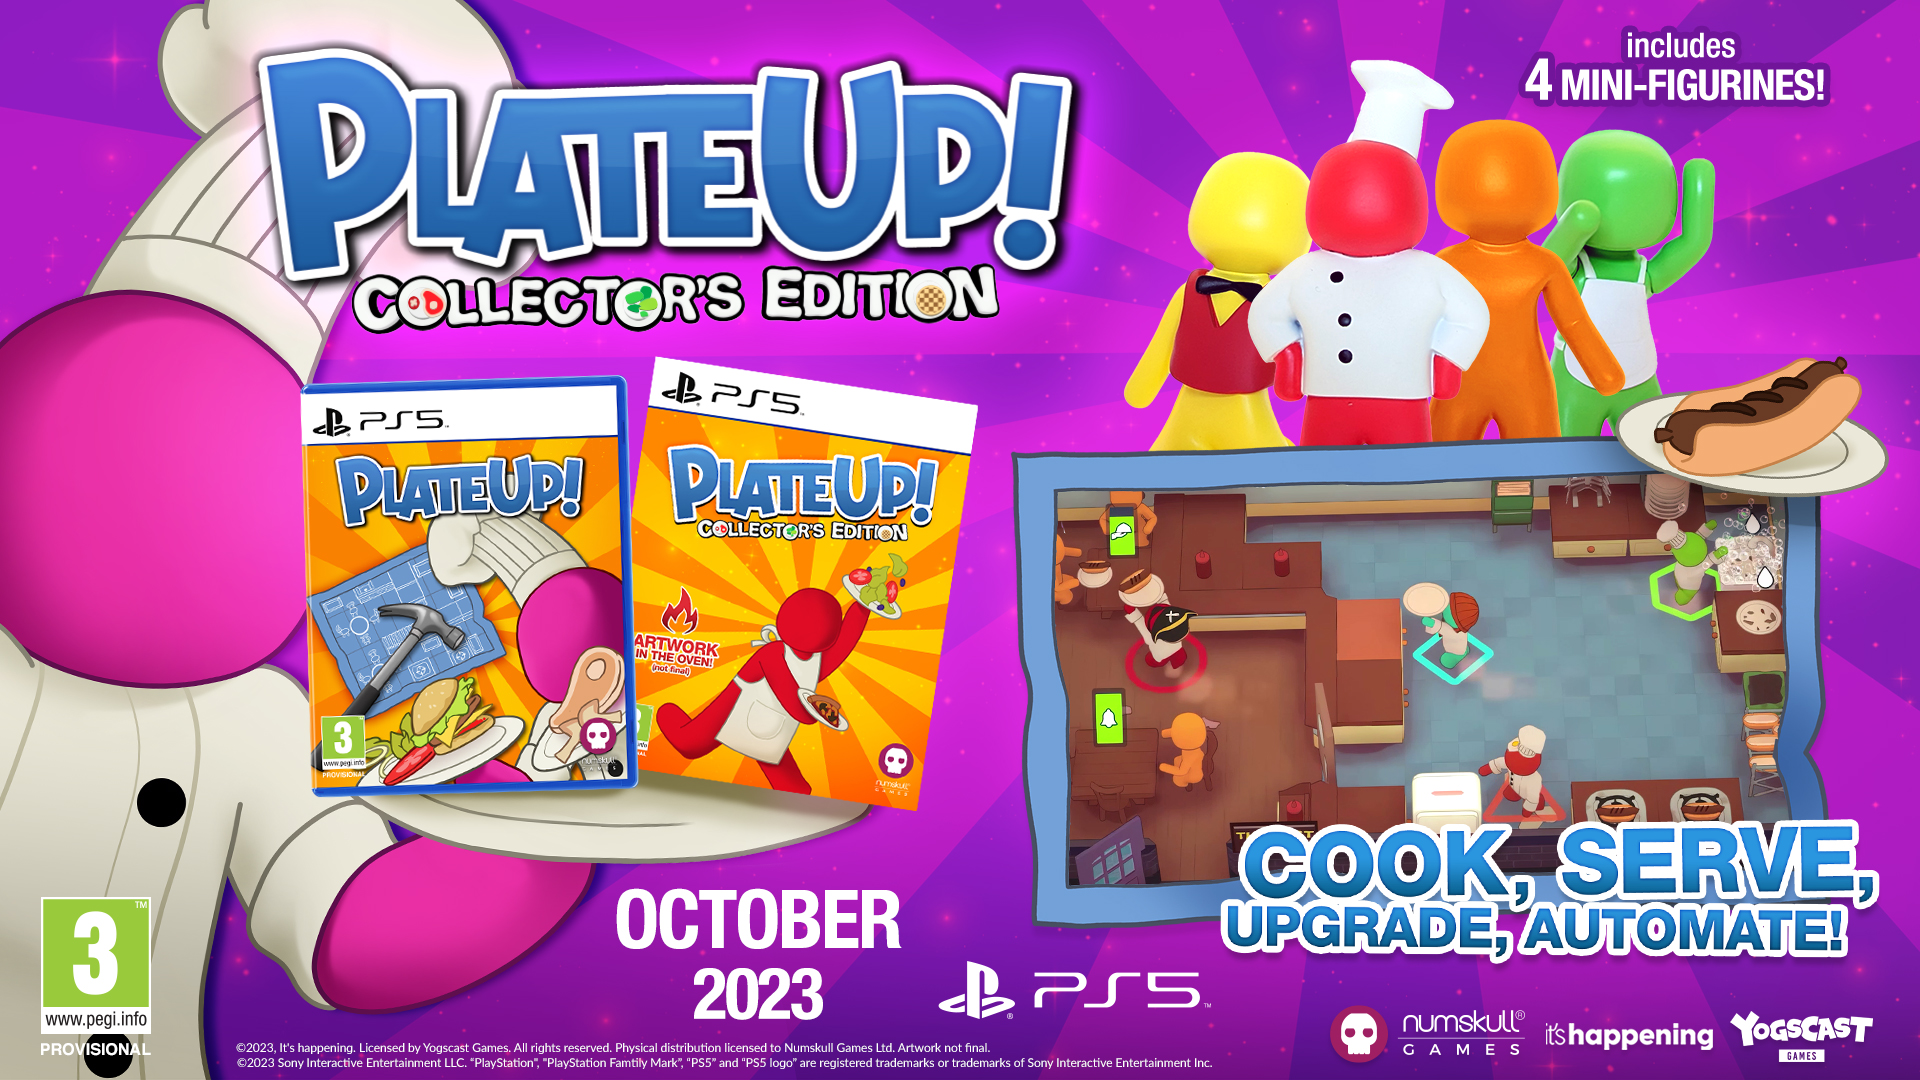 Plate Up! - Collector's Edition (PS5), Numskull Games